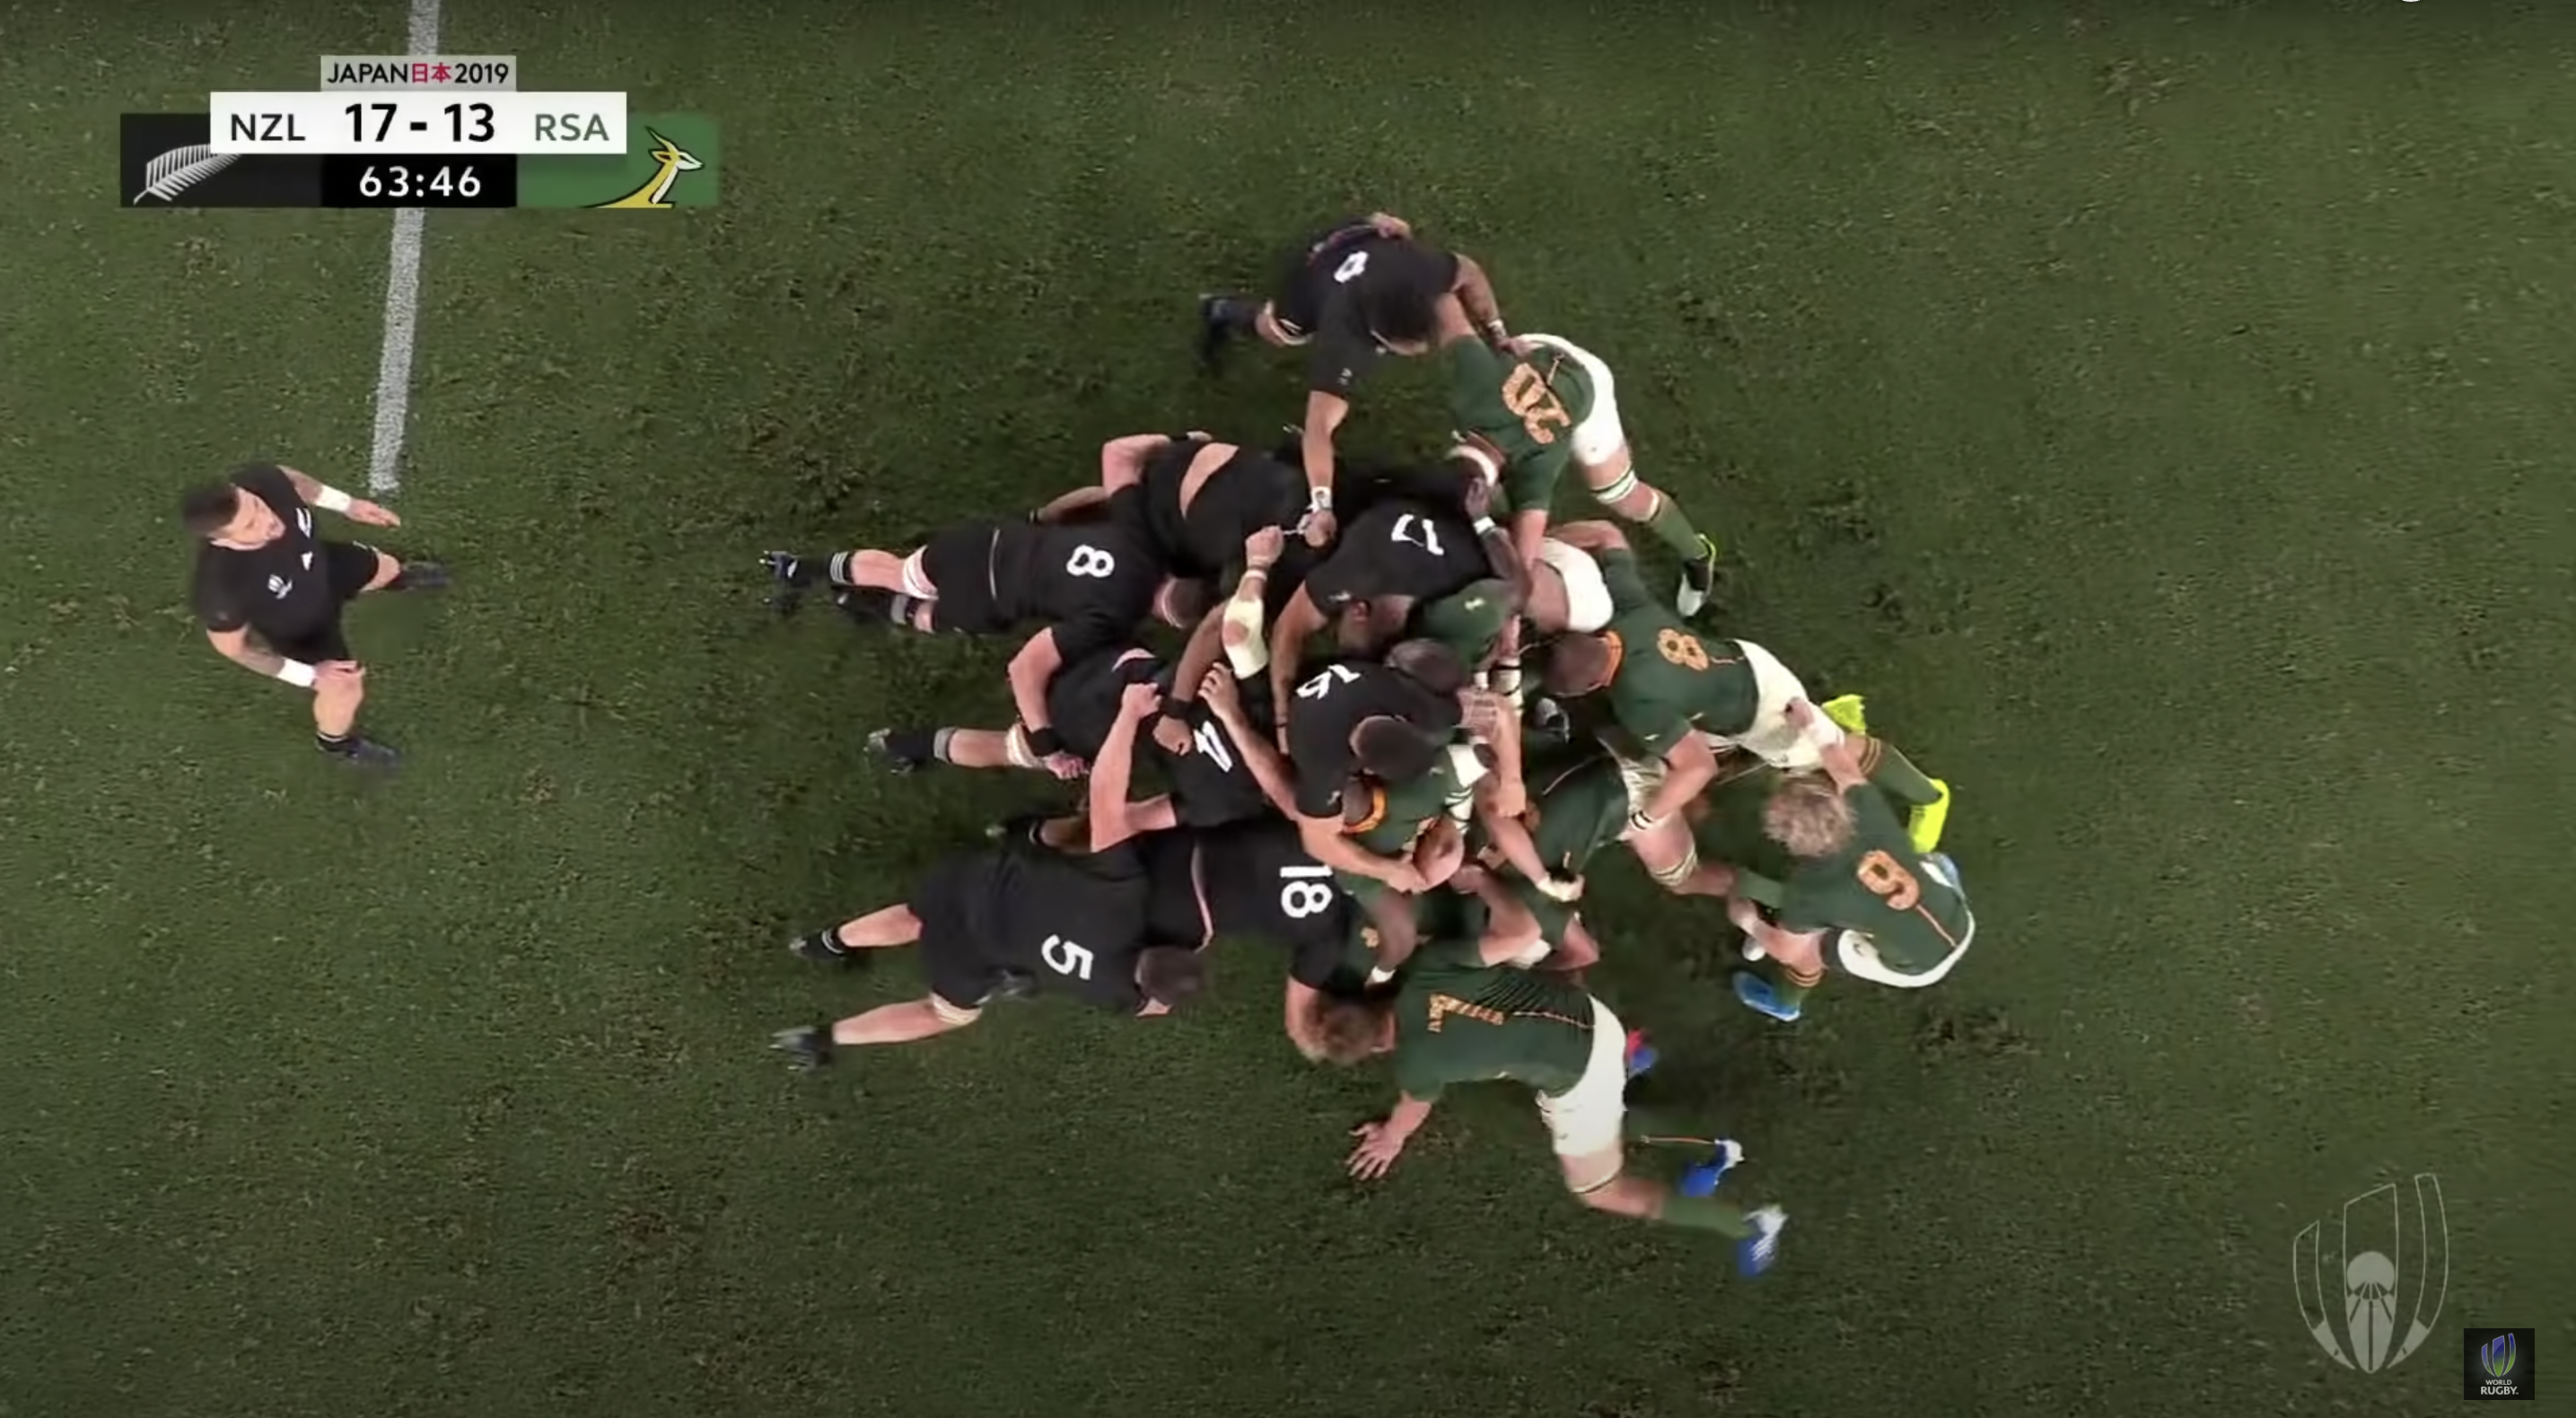 'Hypocrisy indeed': Springboks fans fire back at All Blacks after being ridiculed last year